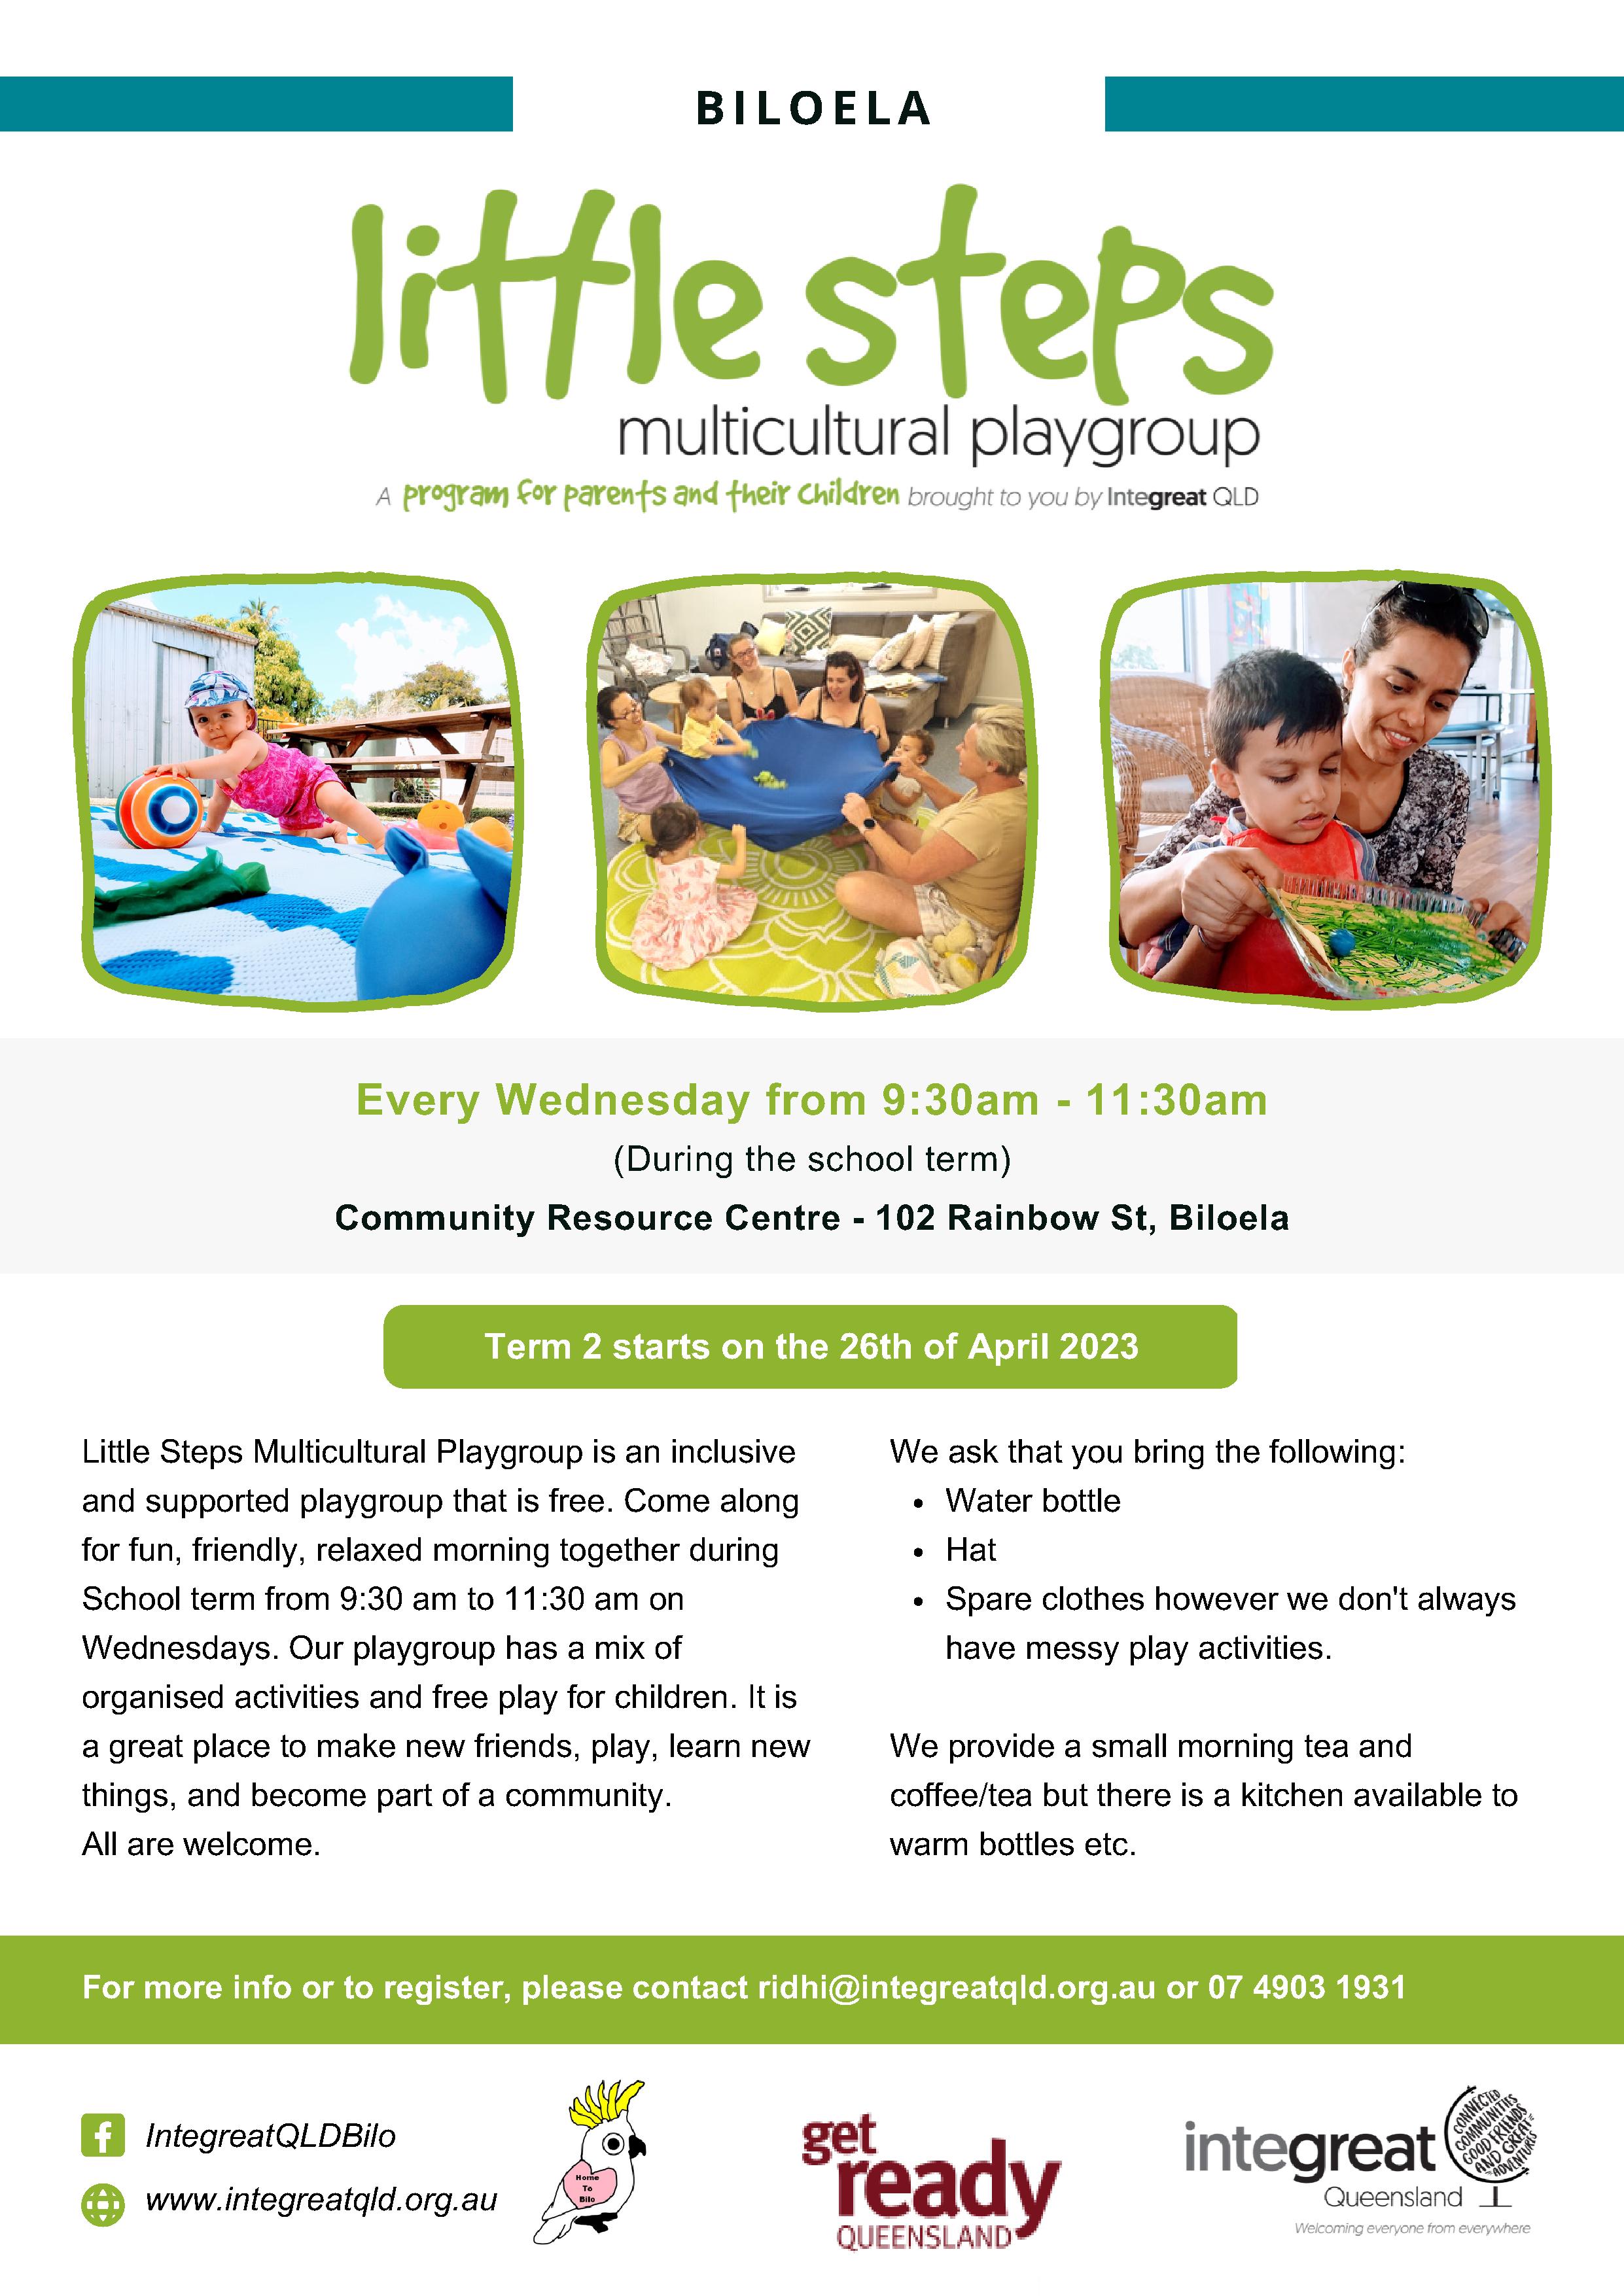 Little Steps multicultural playgroup